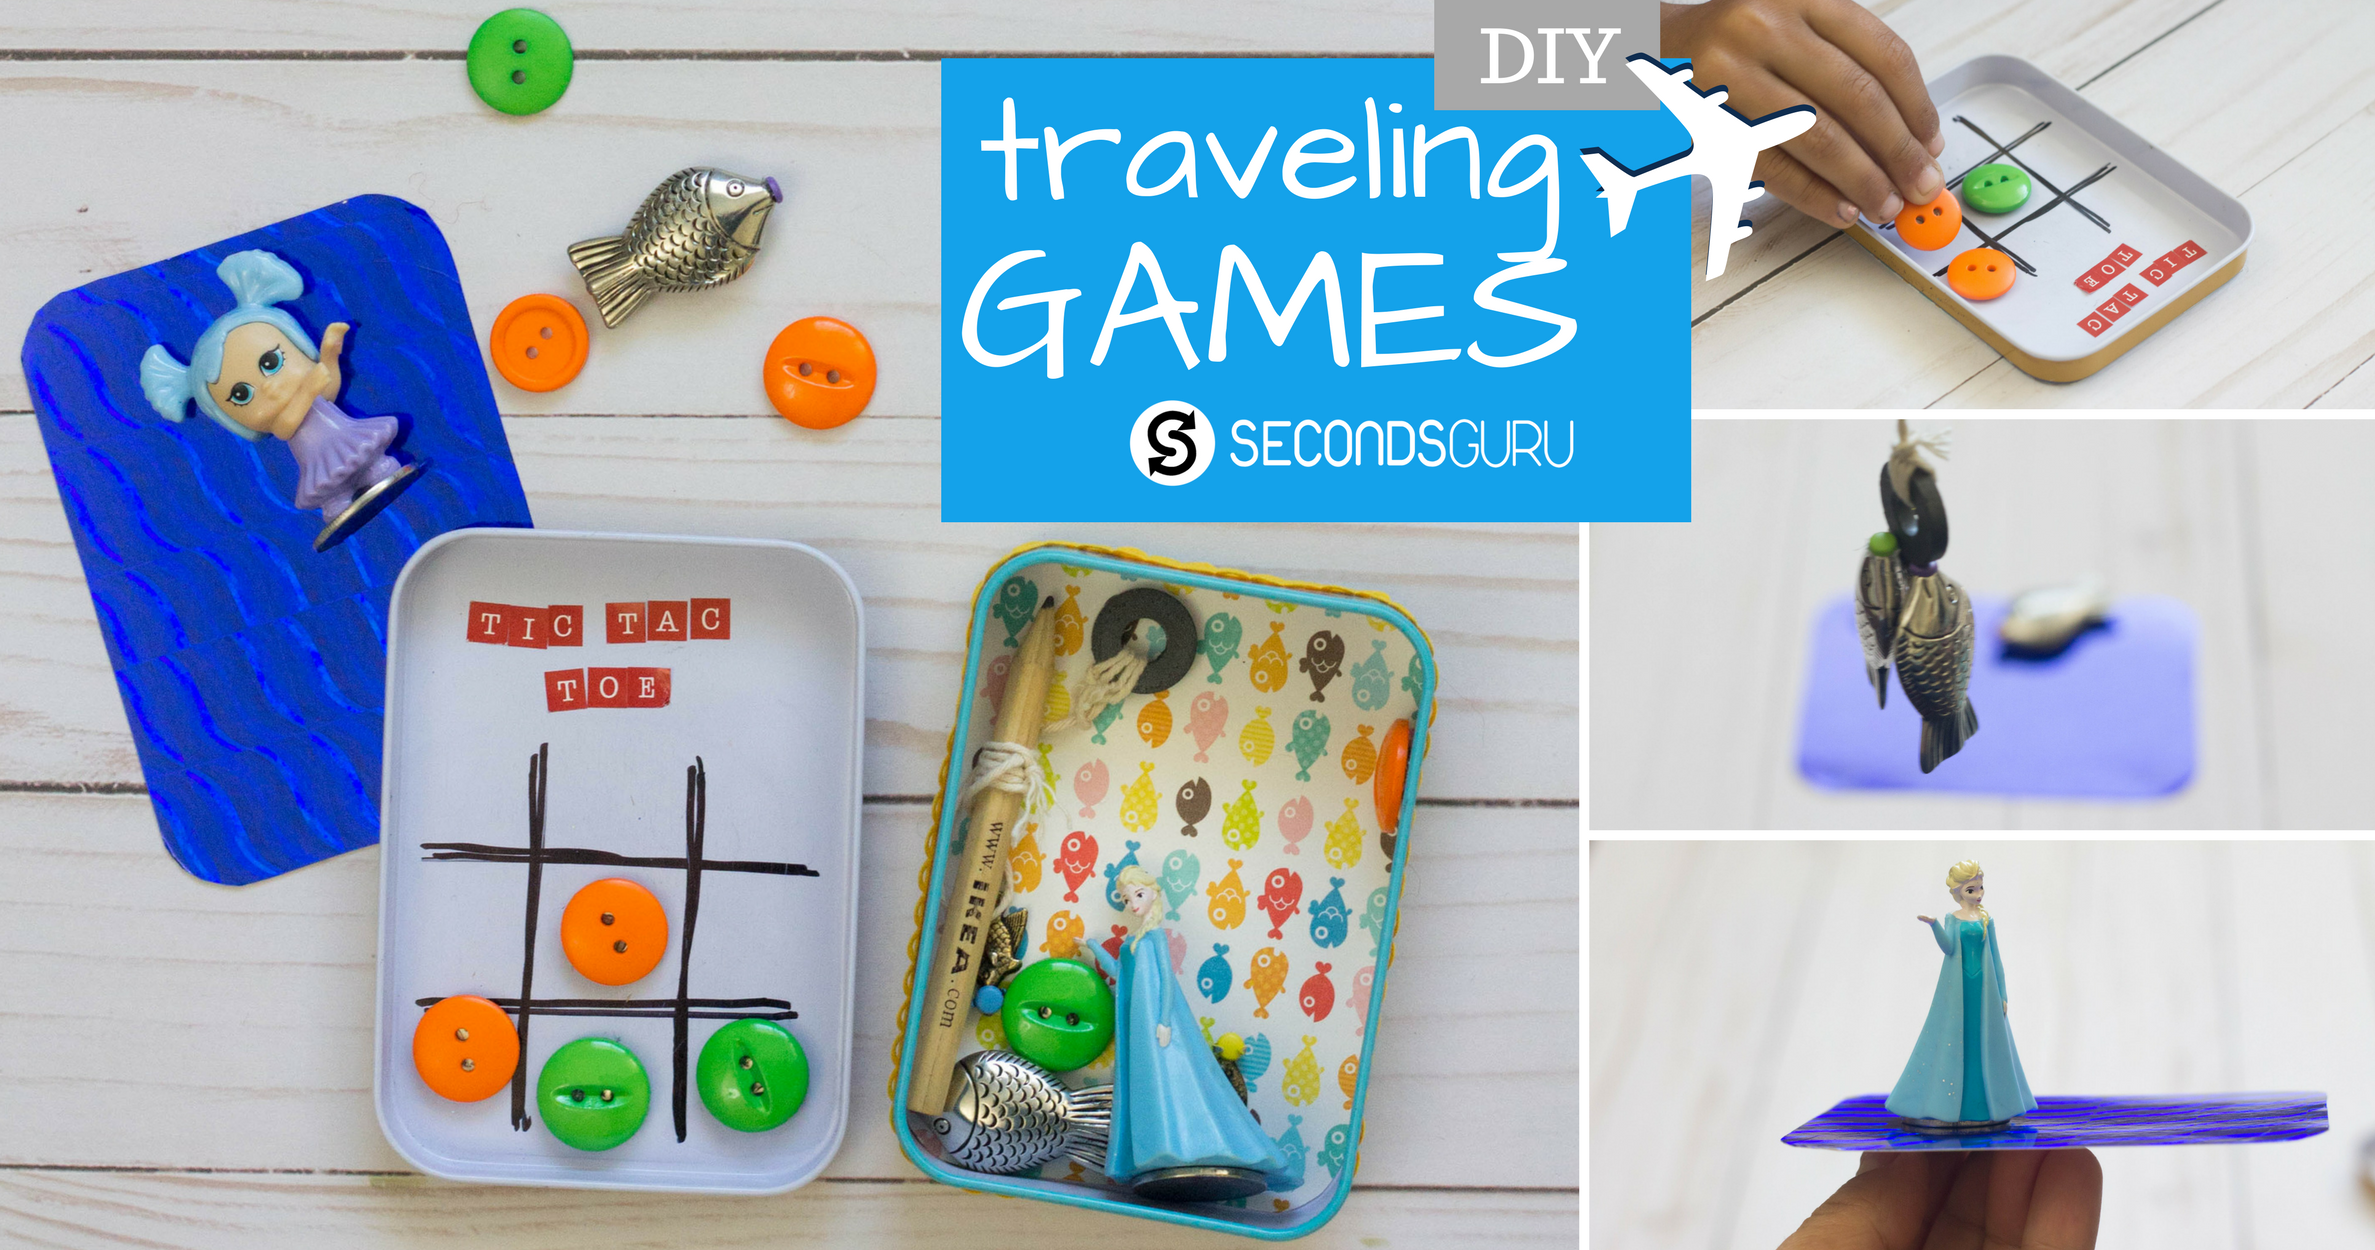 upcycle to create games for flights and travel